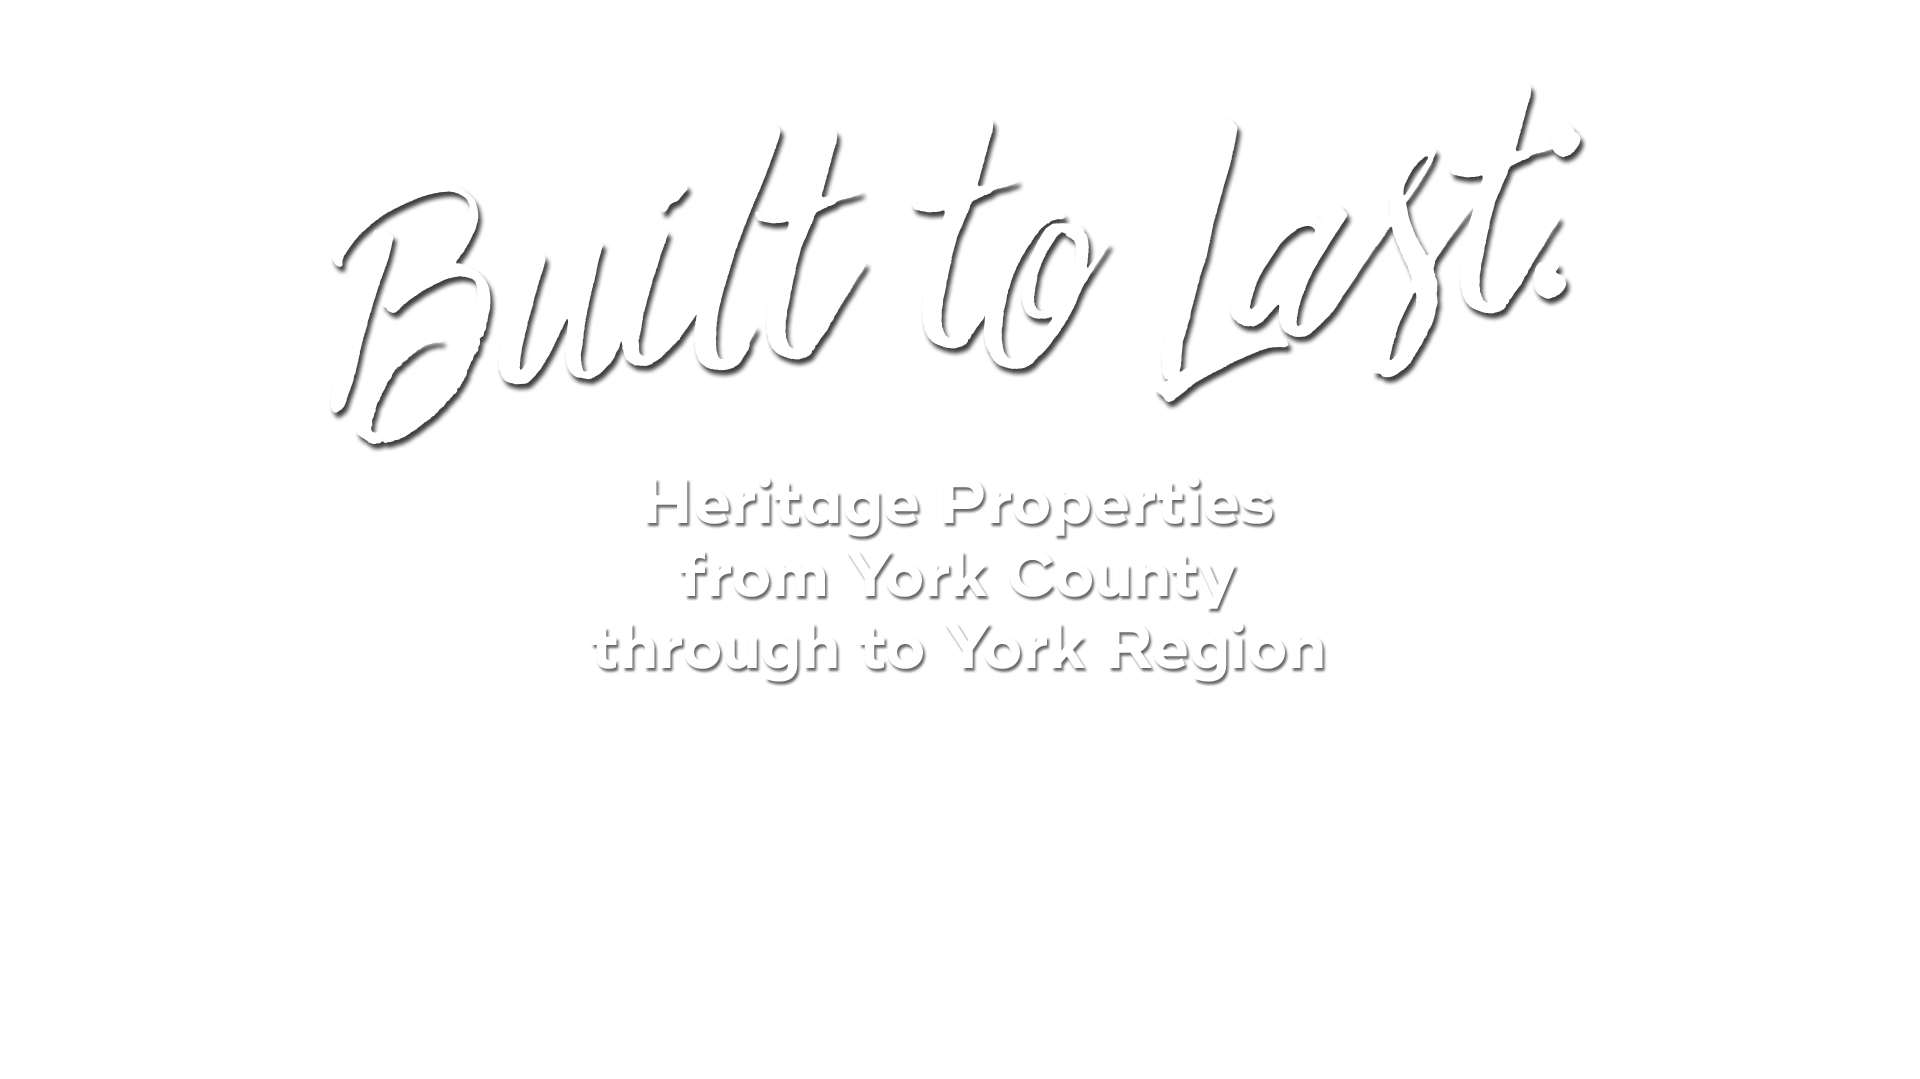 Built to Last: Heritage Properties from York County through to York Region